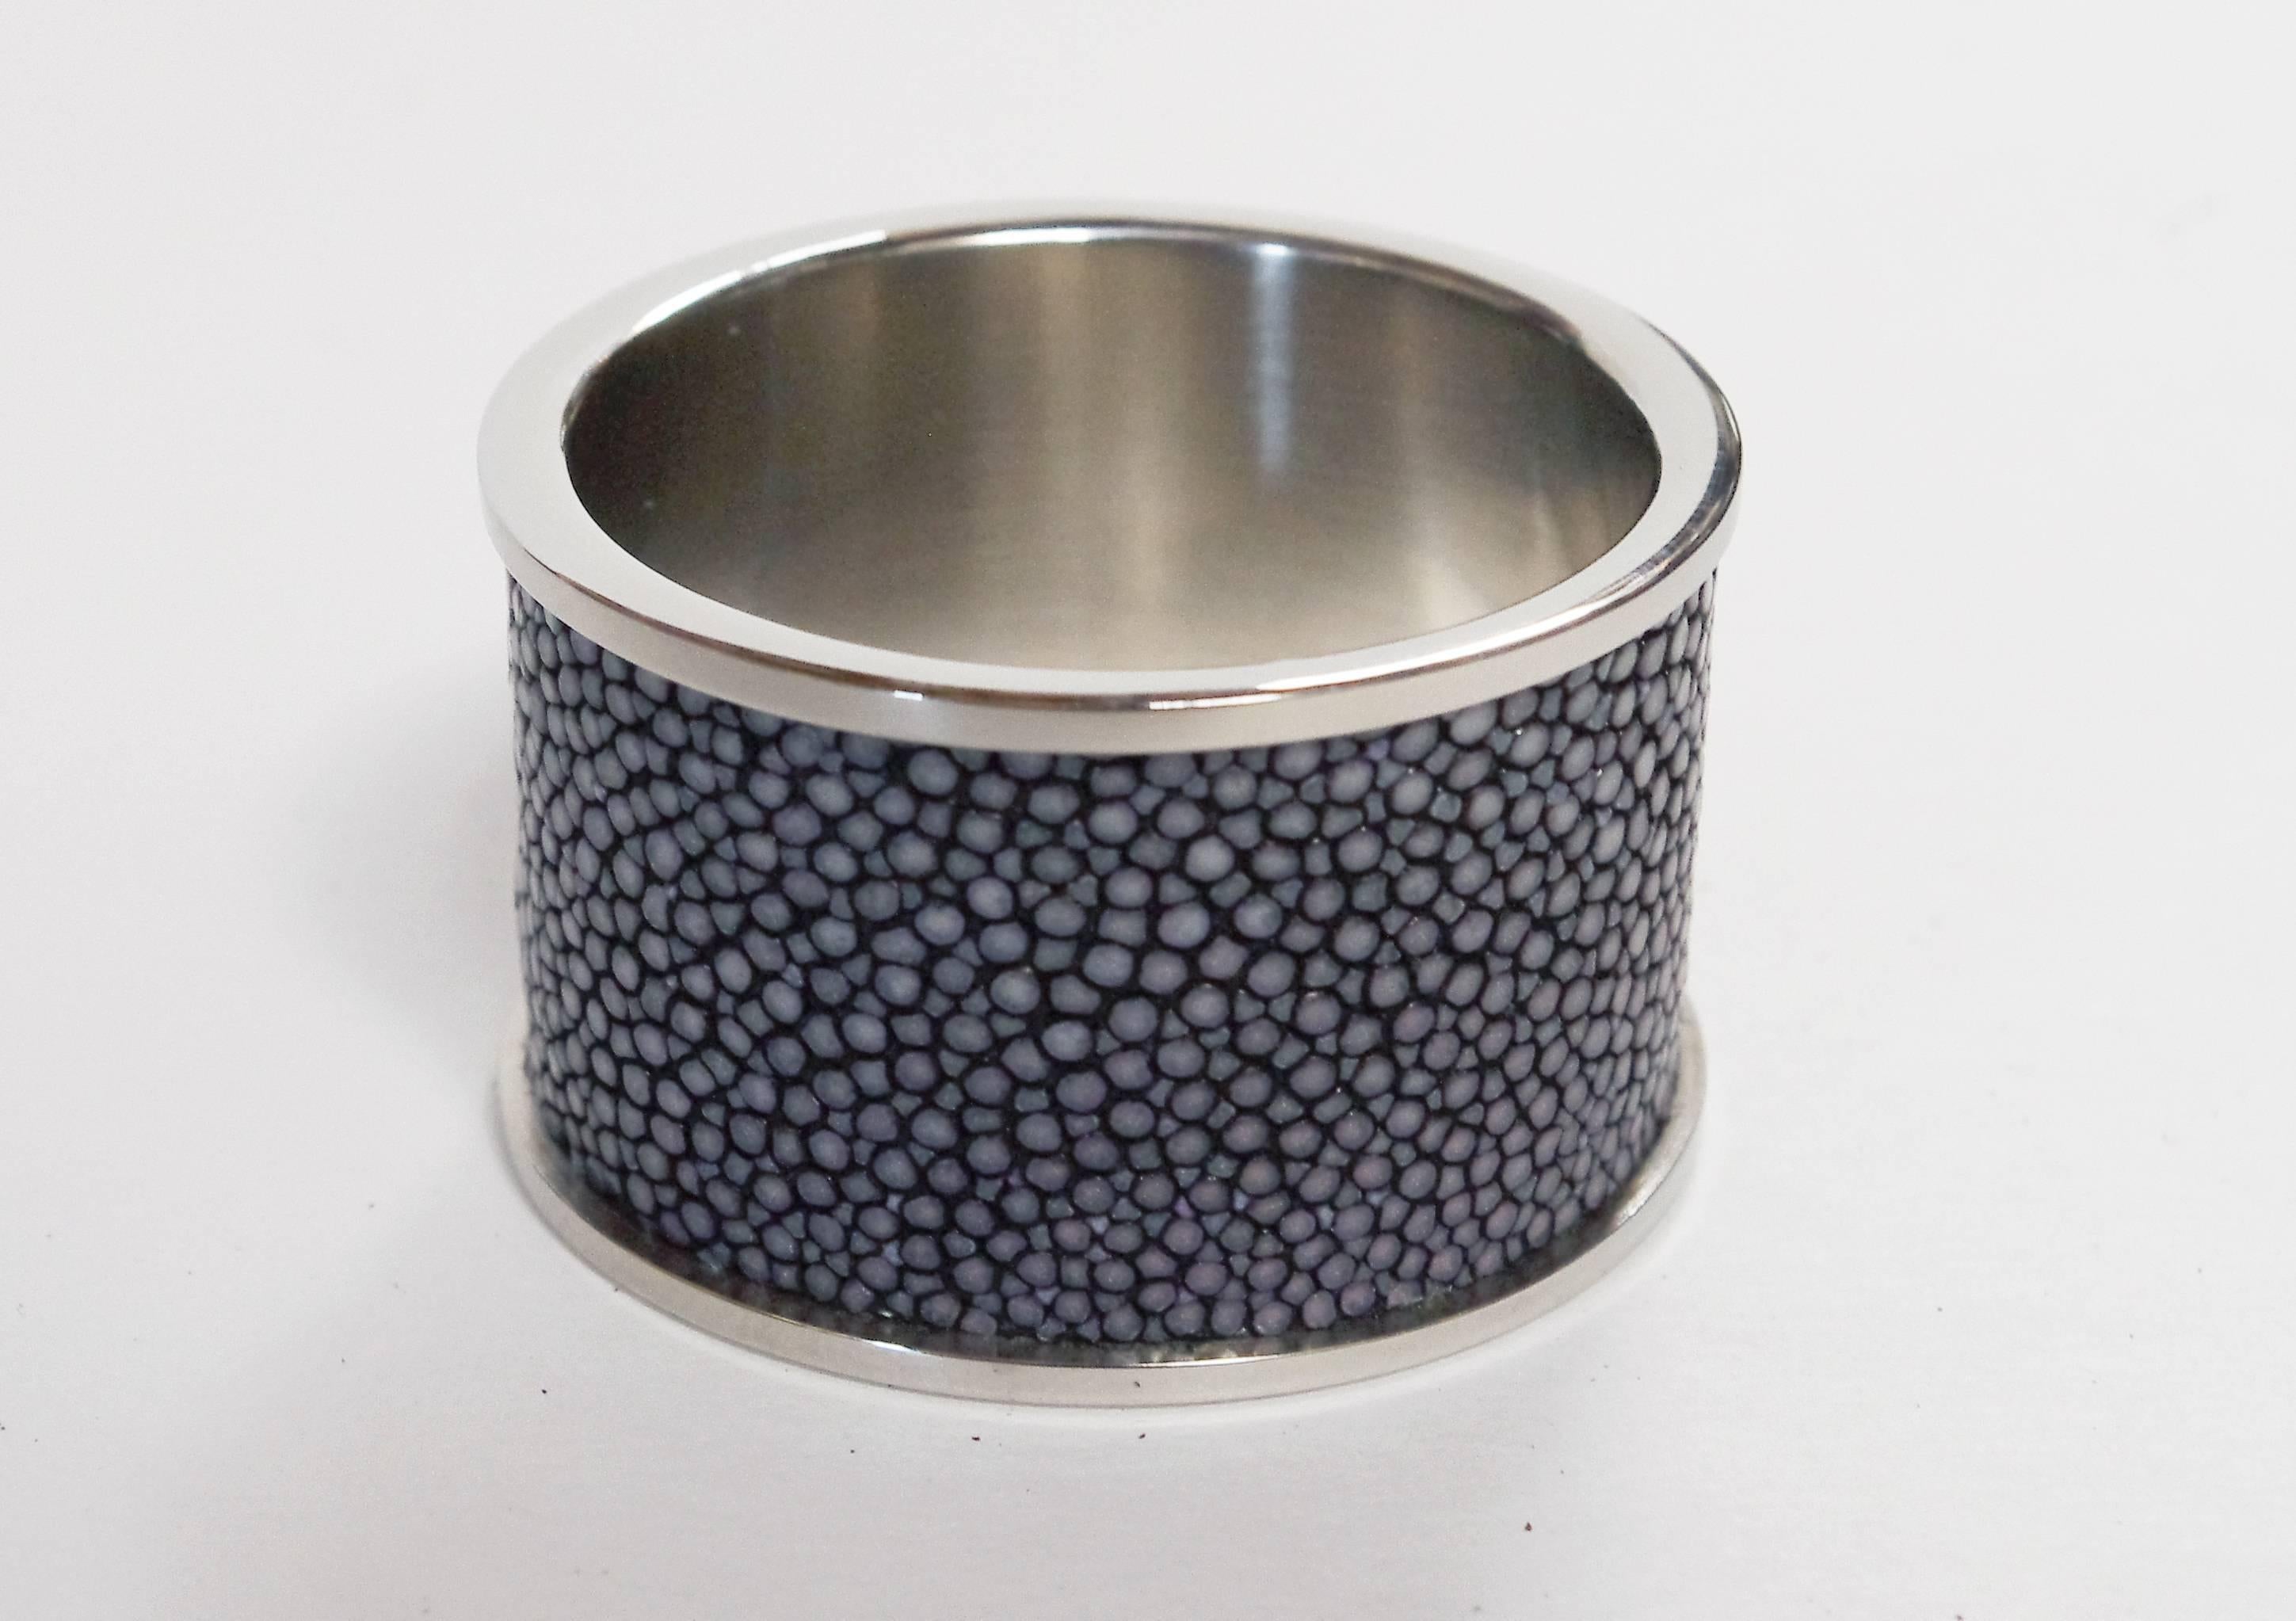 Italian black shagreen and stainless steel napkin rings with matching black leather box designed by Fabio Bergomi for Fabio Ltd / Made in Italy 
Each ring has diameter 1.5 inches and width 1 inch
We have 6 sets available, currently ON 30% OFF SALE